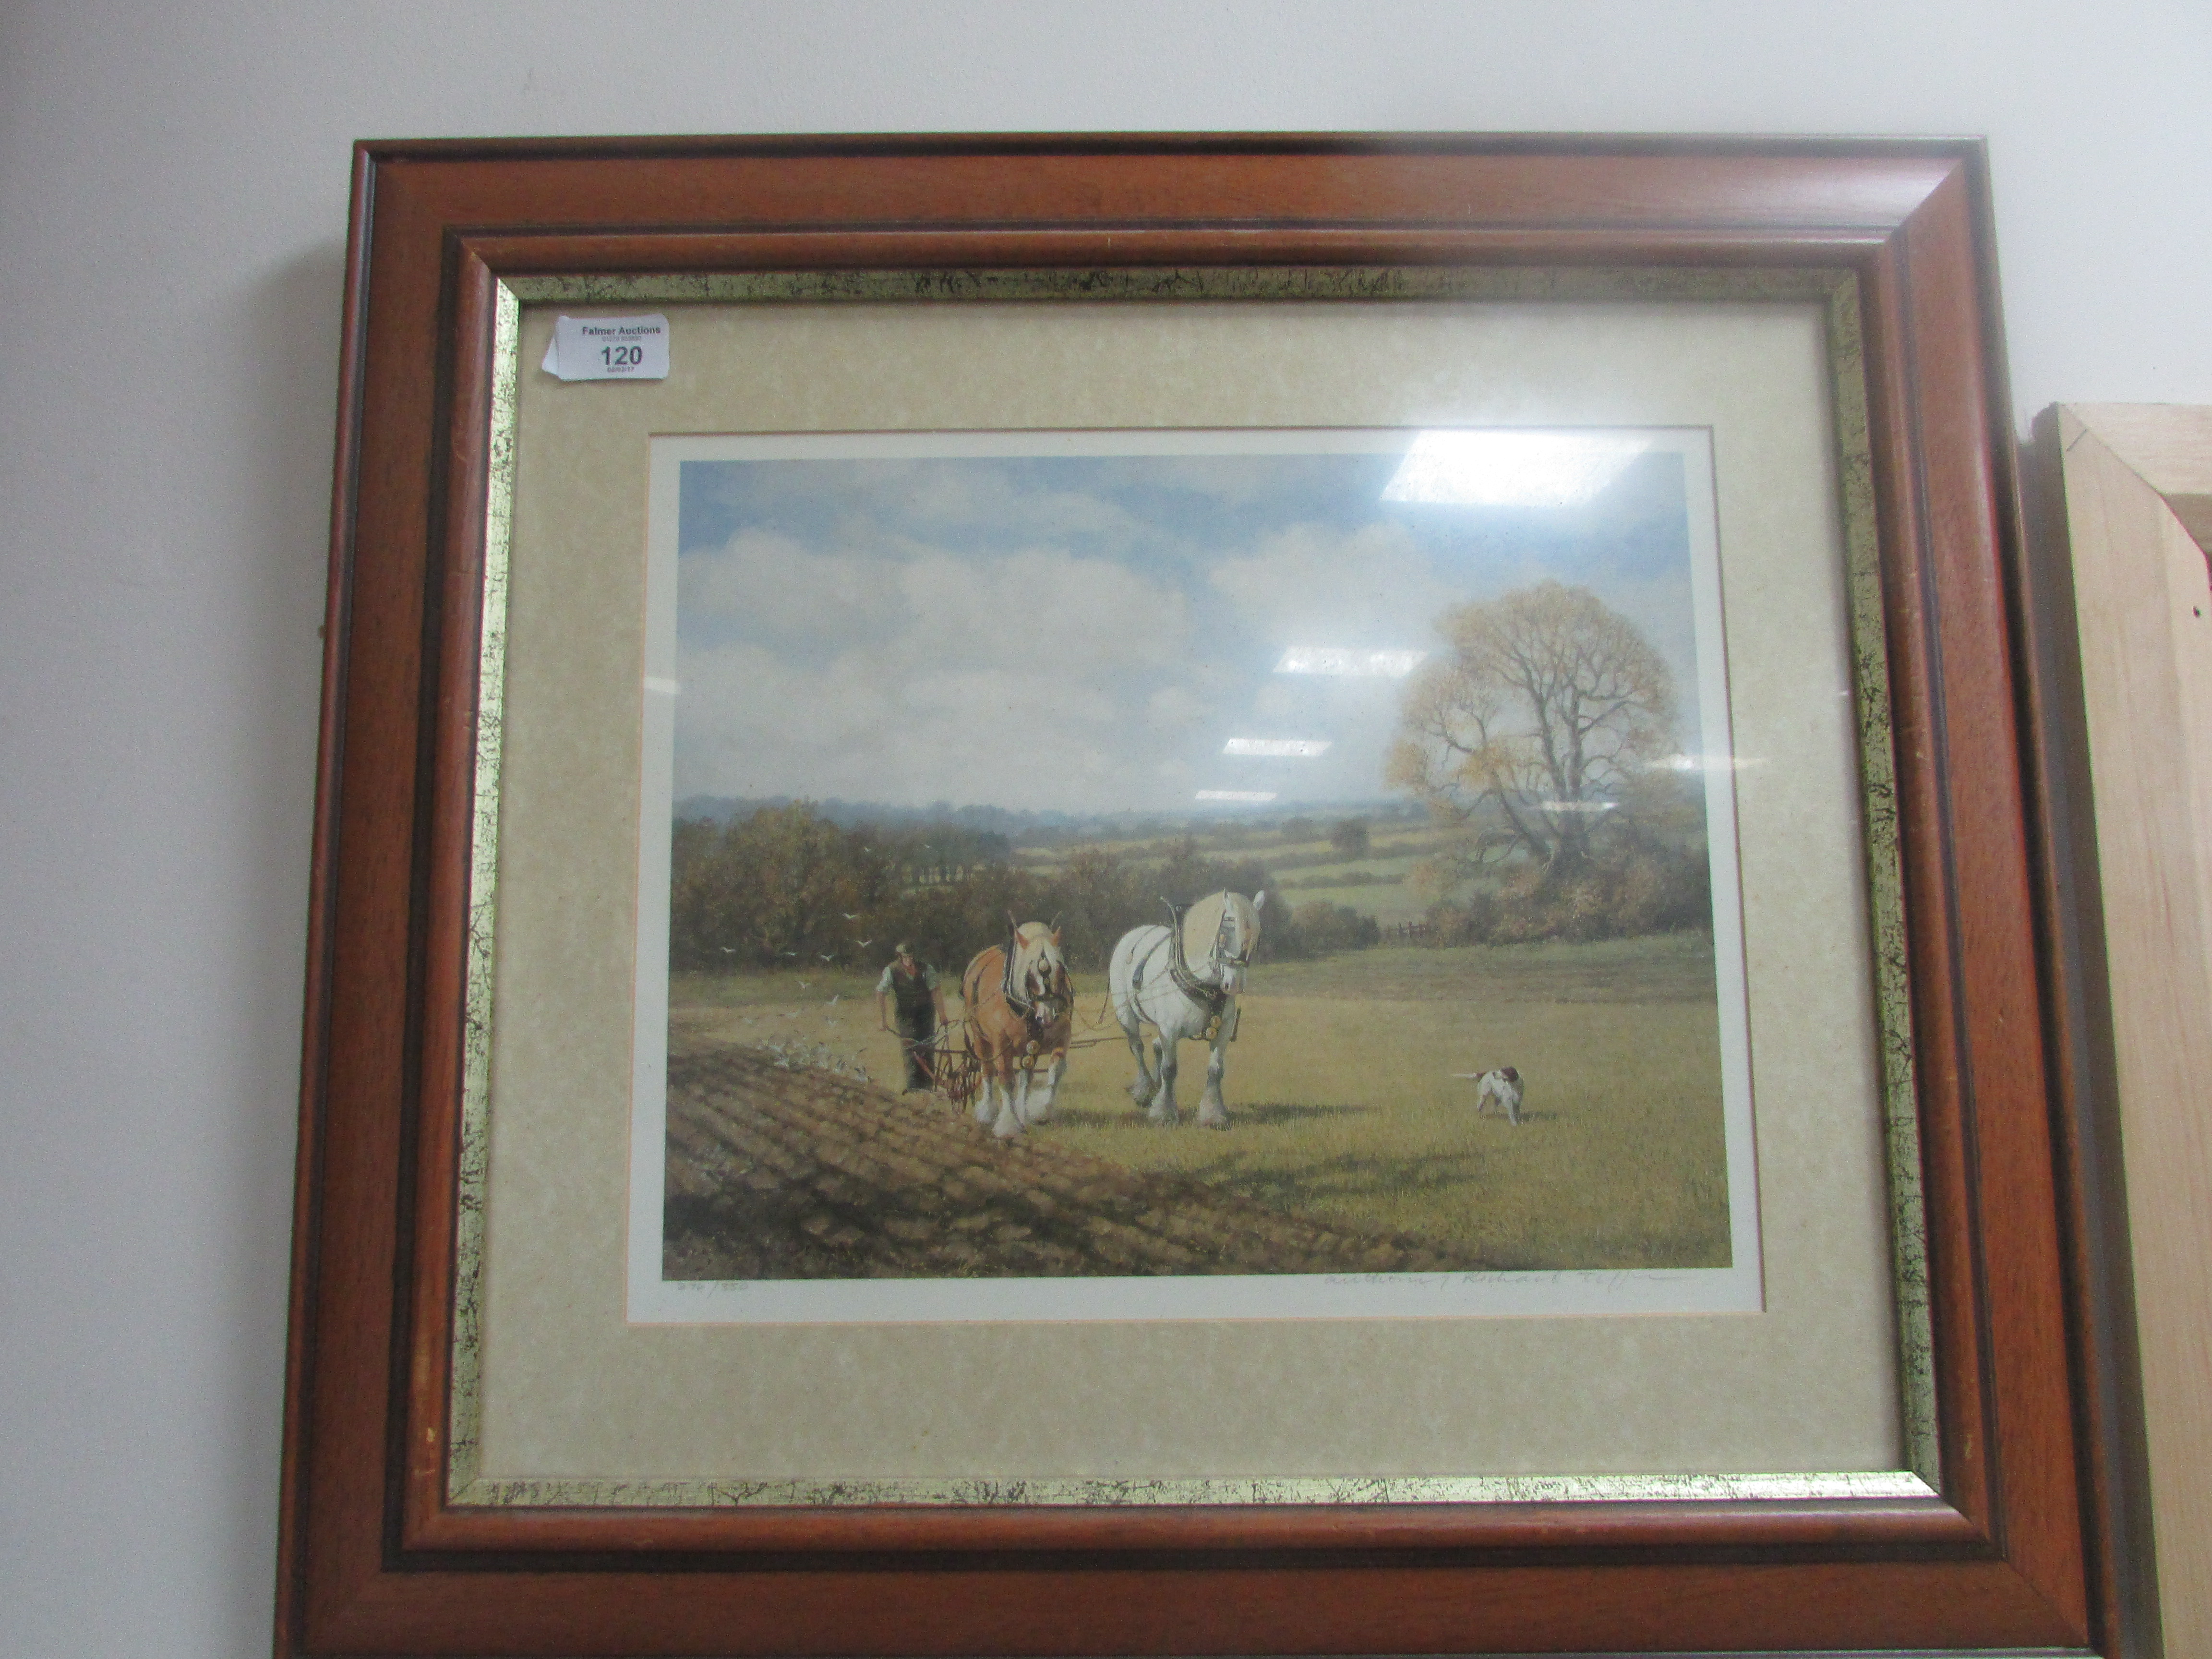 Limited edition print 'Plough of The Sussex' by Anthony Richard 276/350